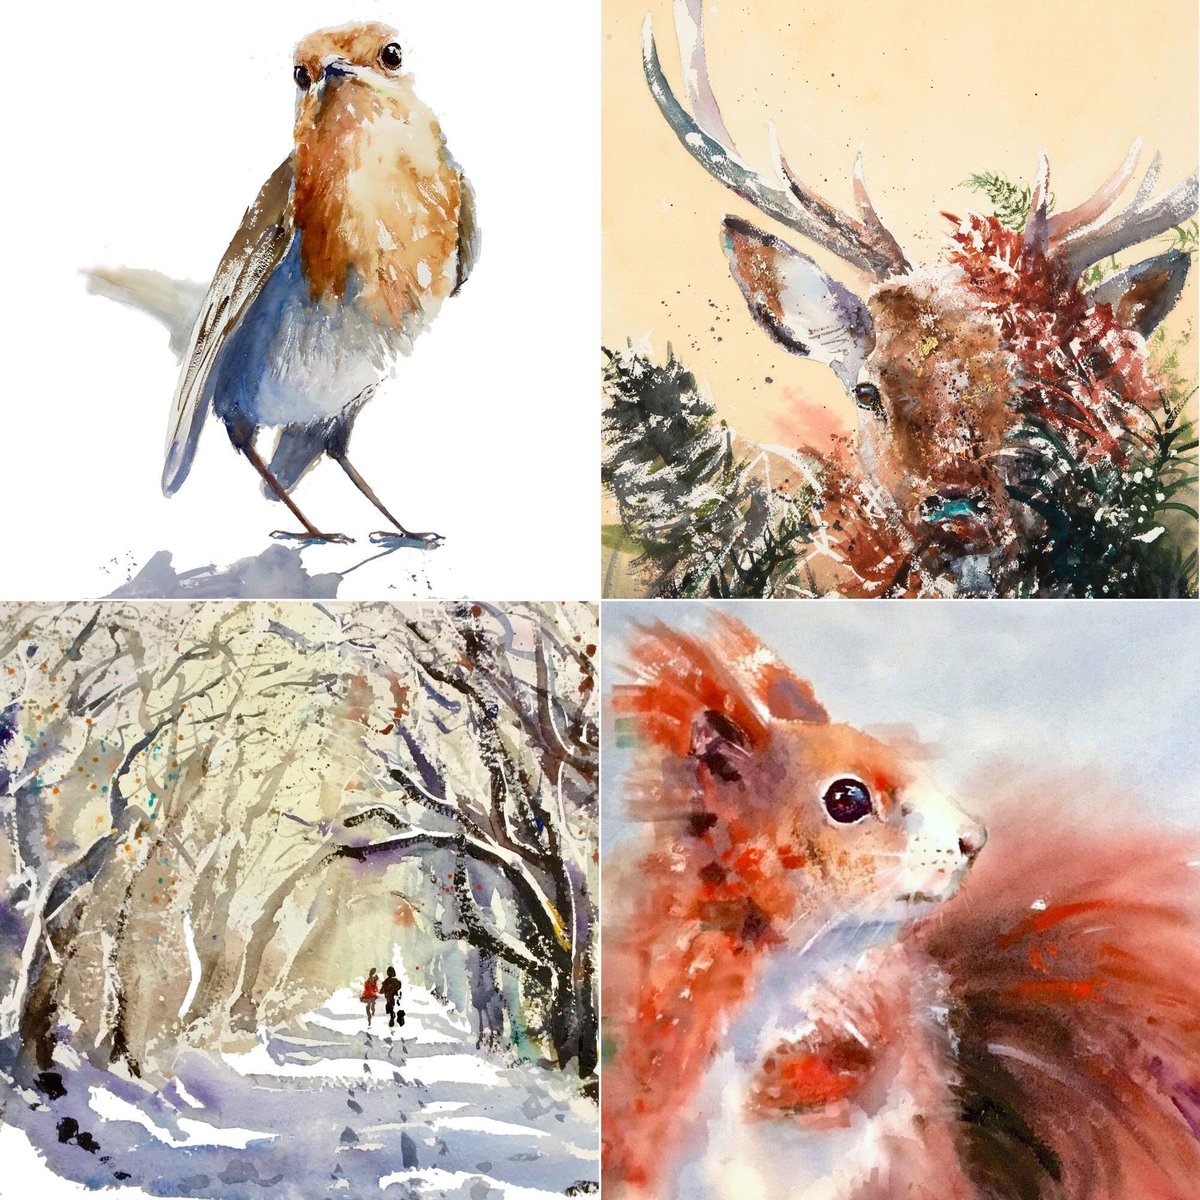 Finally feeling festive! I’ve updated my website with the remaining card packs for you fellow festive stragglers 😉. Last exhibition of the year done, a couple of gallery deliveries to make, then time to unwind for Christmas! karenthomaswatercolour.com/shop-5 #christmas #card #devonartist